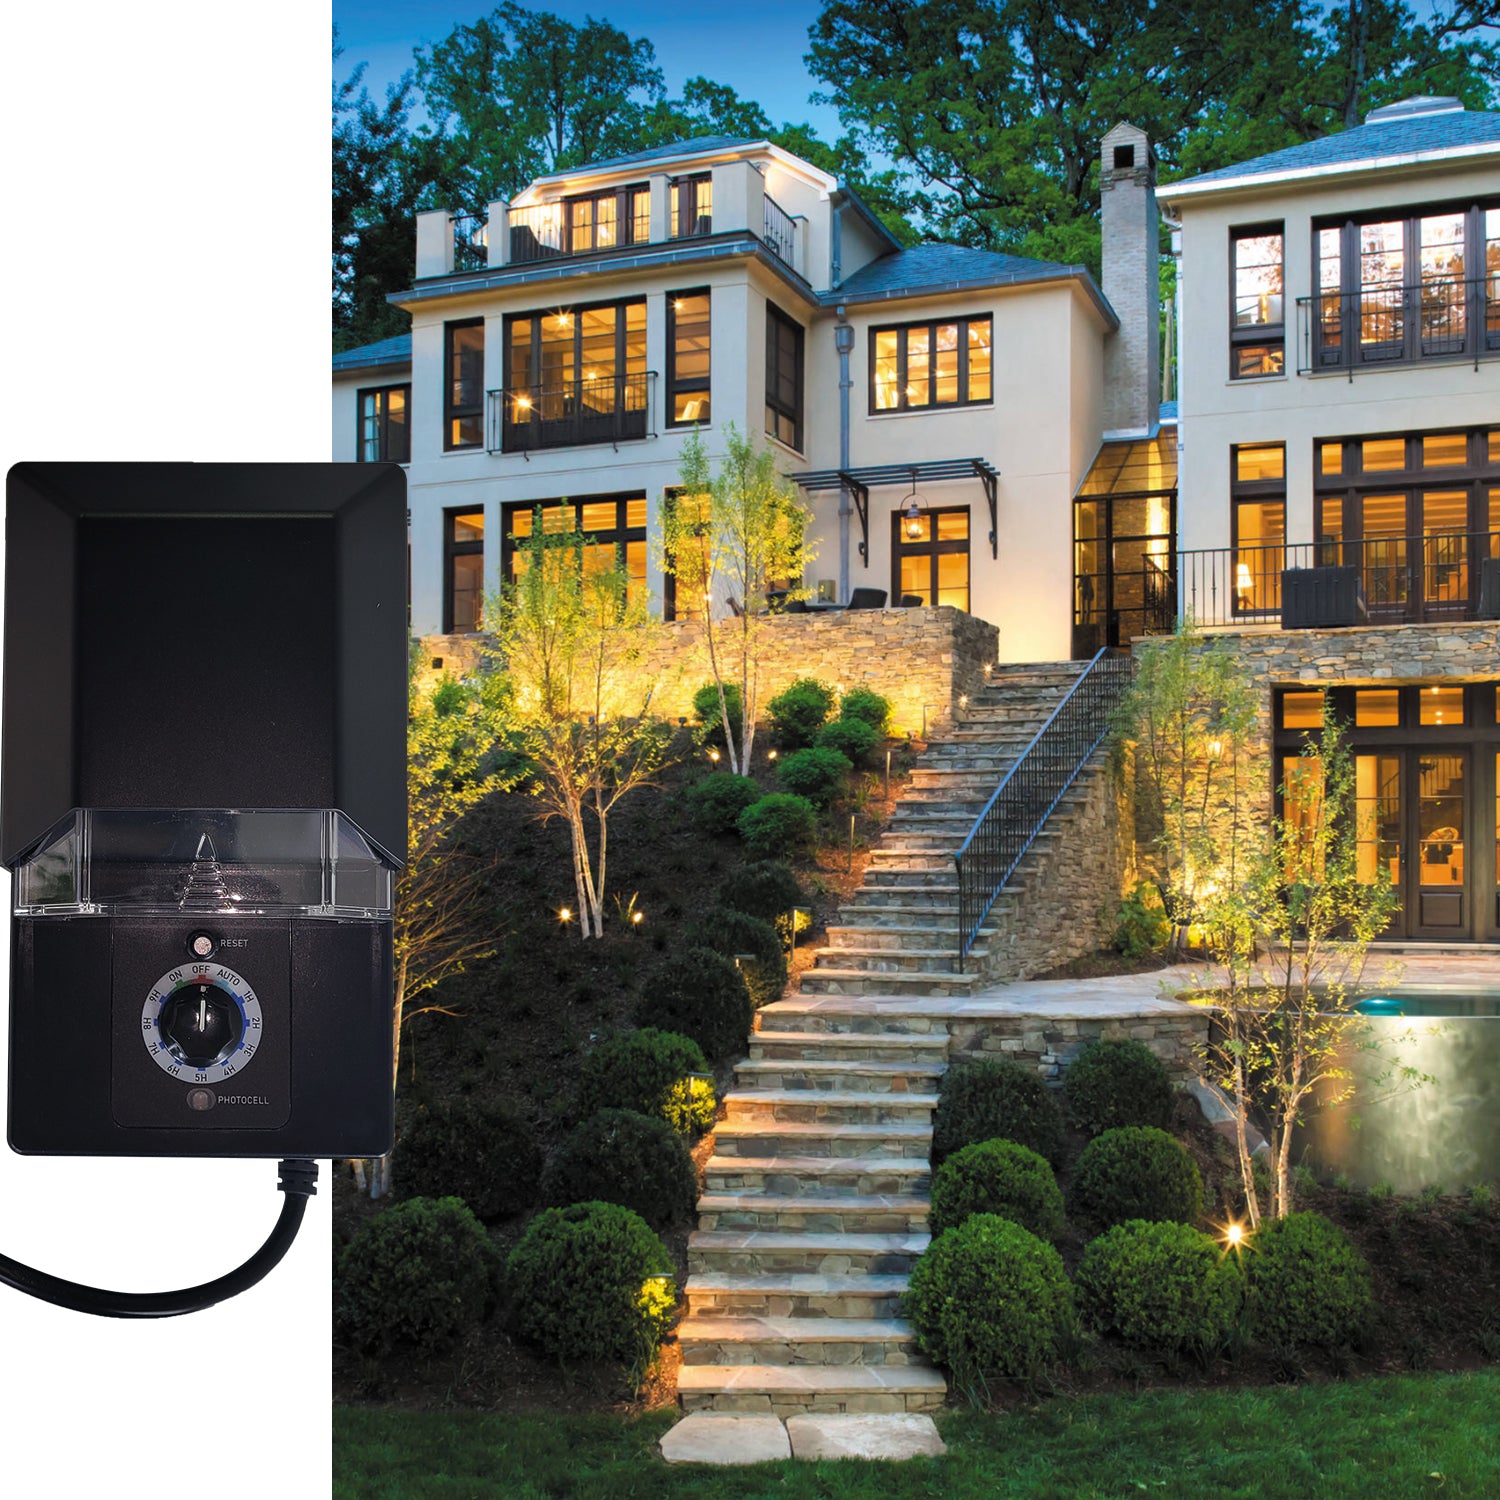 Modern multi-story house with illuminated garden and steps, featuring the 100W 200W Low Voltage 2COM Multi-Tap Transformer COT711P in the bottom left corner.